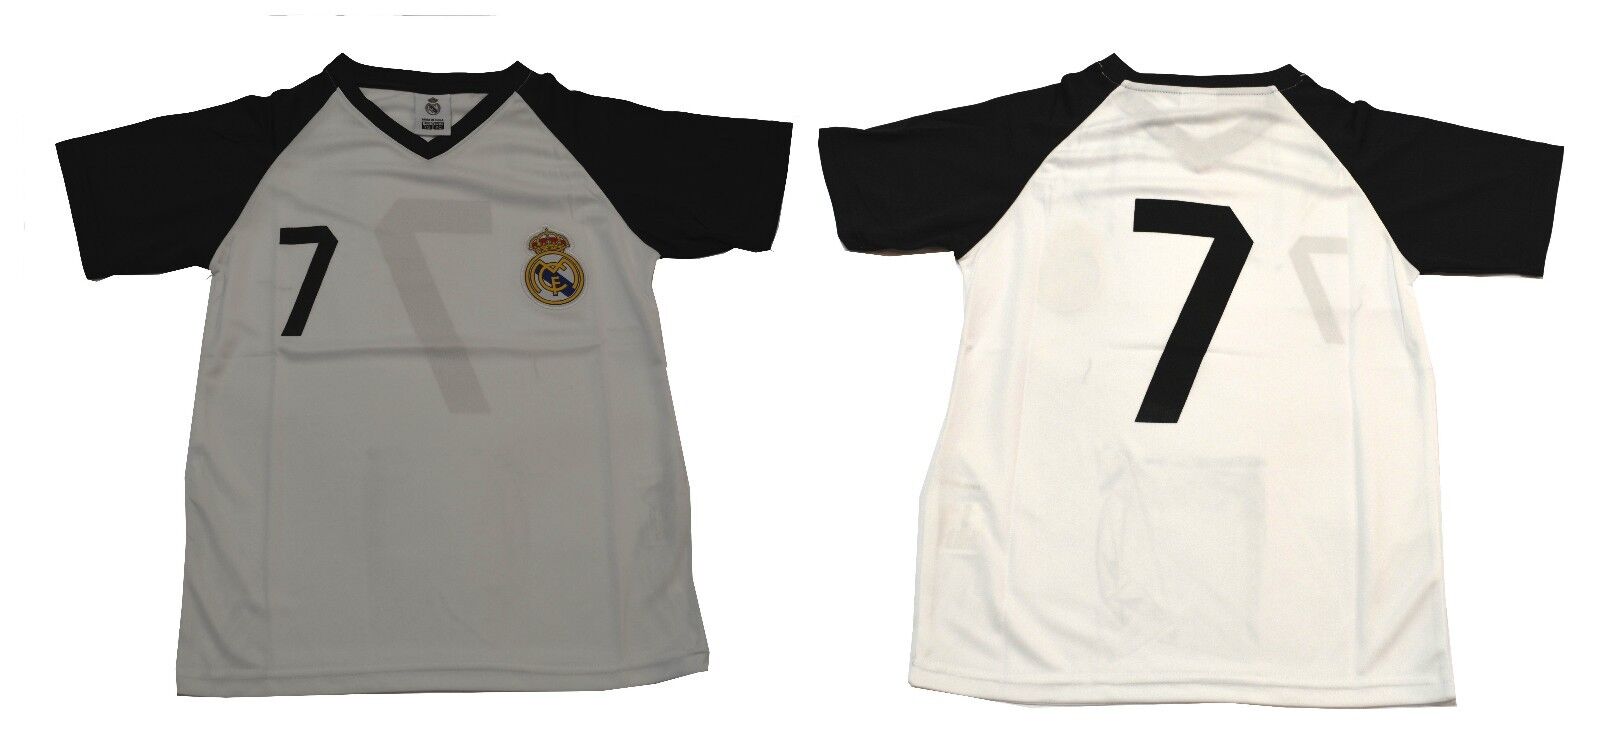 Youth Soccer Jersey Real Madrid  Cristiano Ronaldo Number 7 Boy Kids